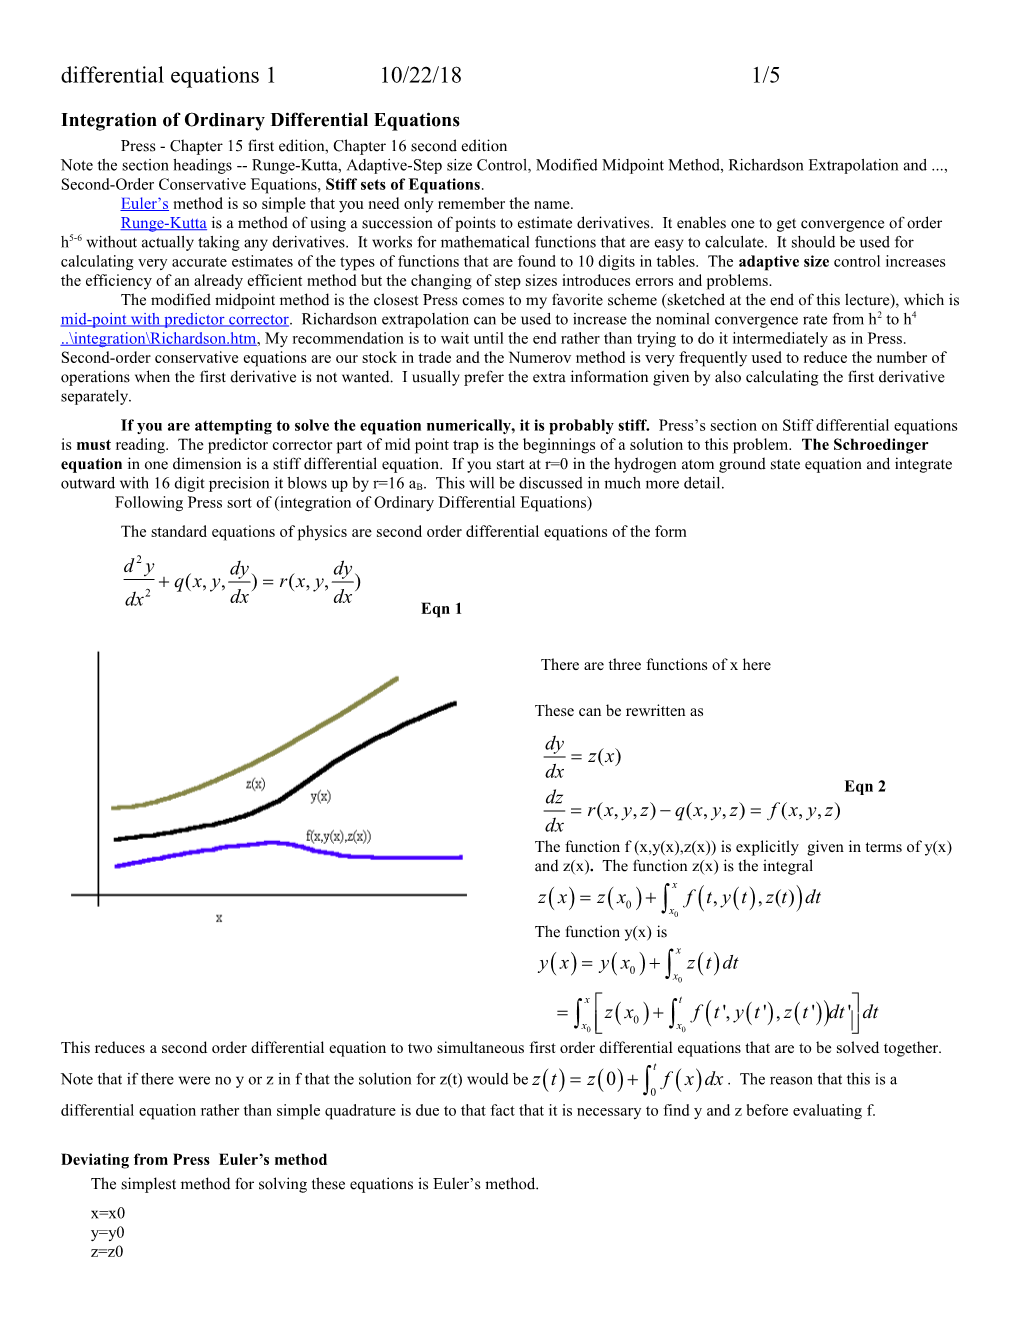 Integration of Ordinary Differential Equations